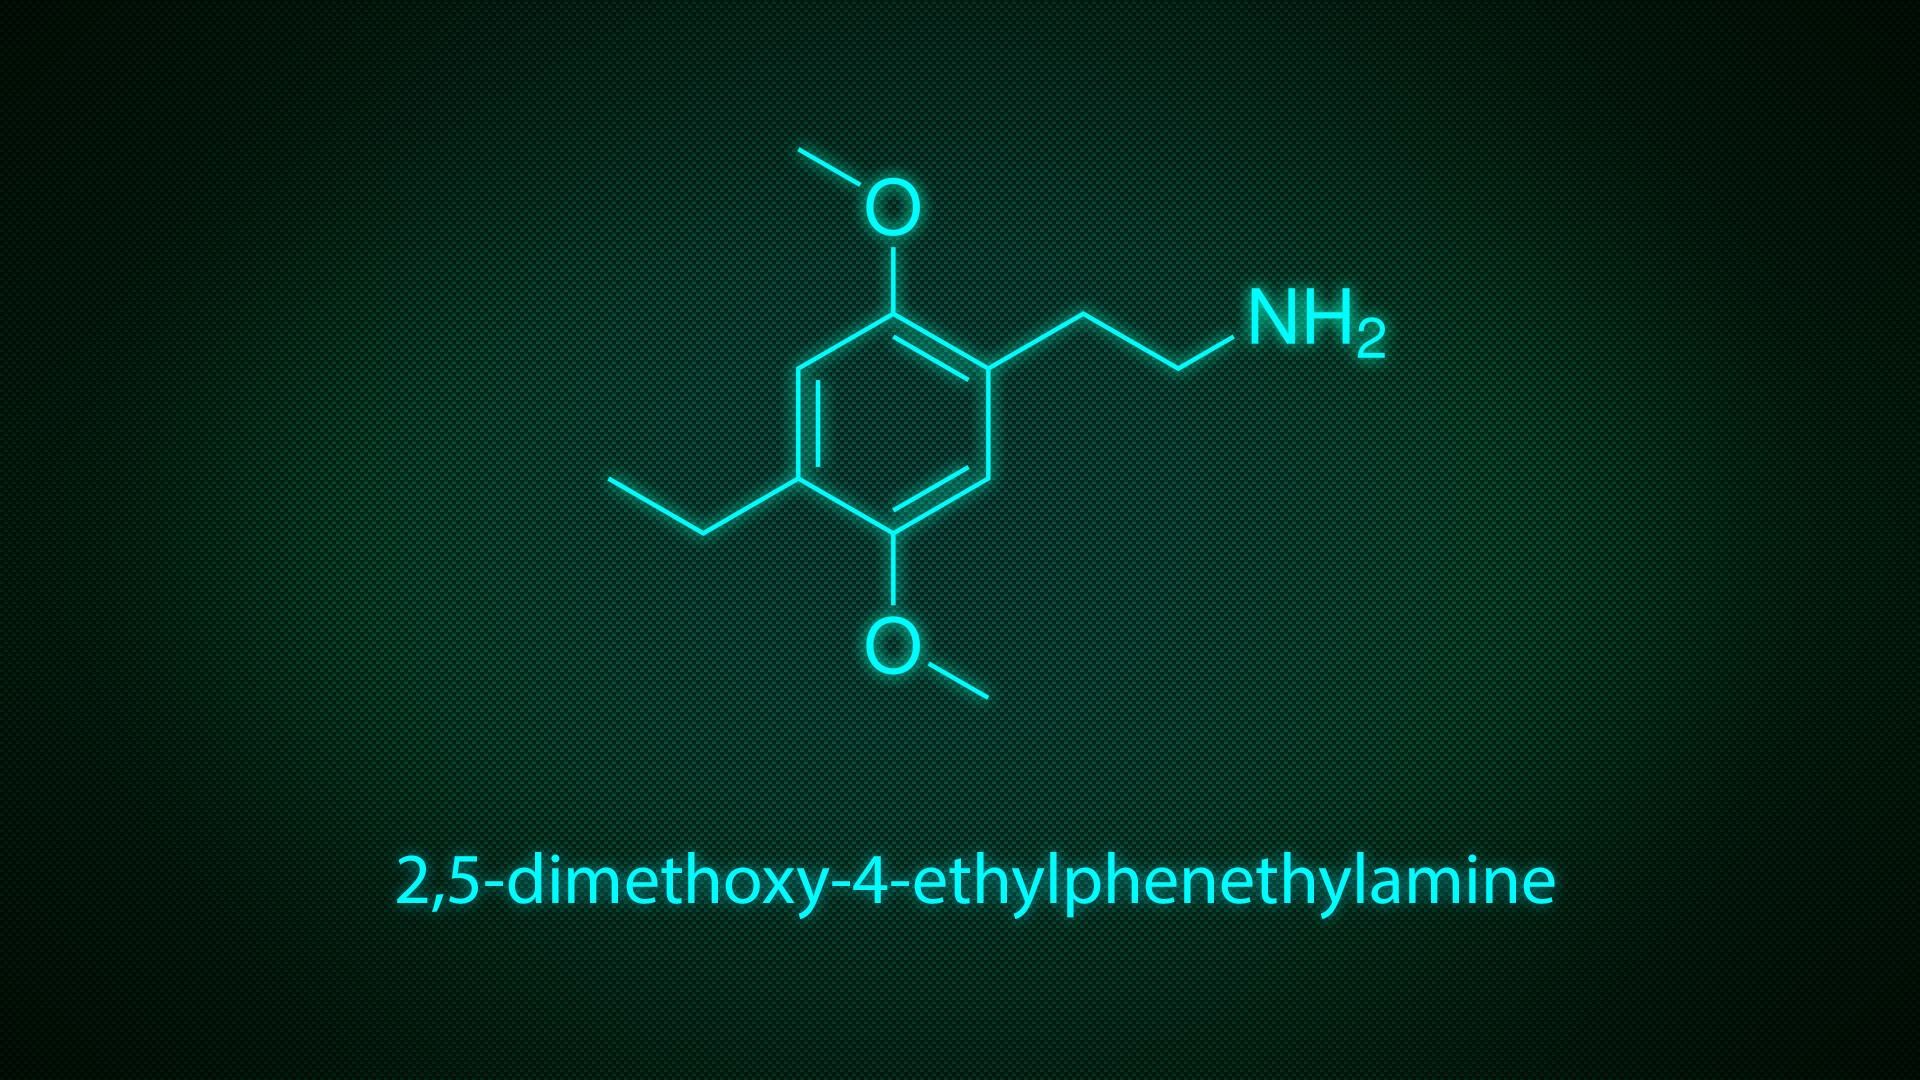 1920x1080 I made a few drug molecule wallpapers () not too long ago, I might  as well share them!